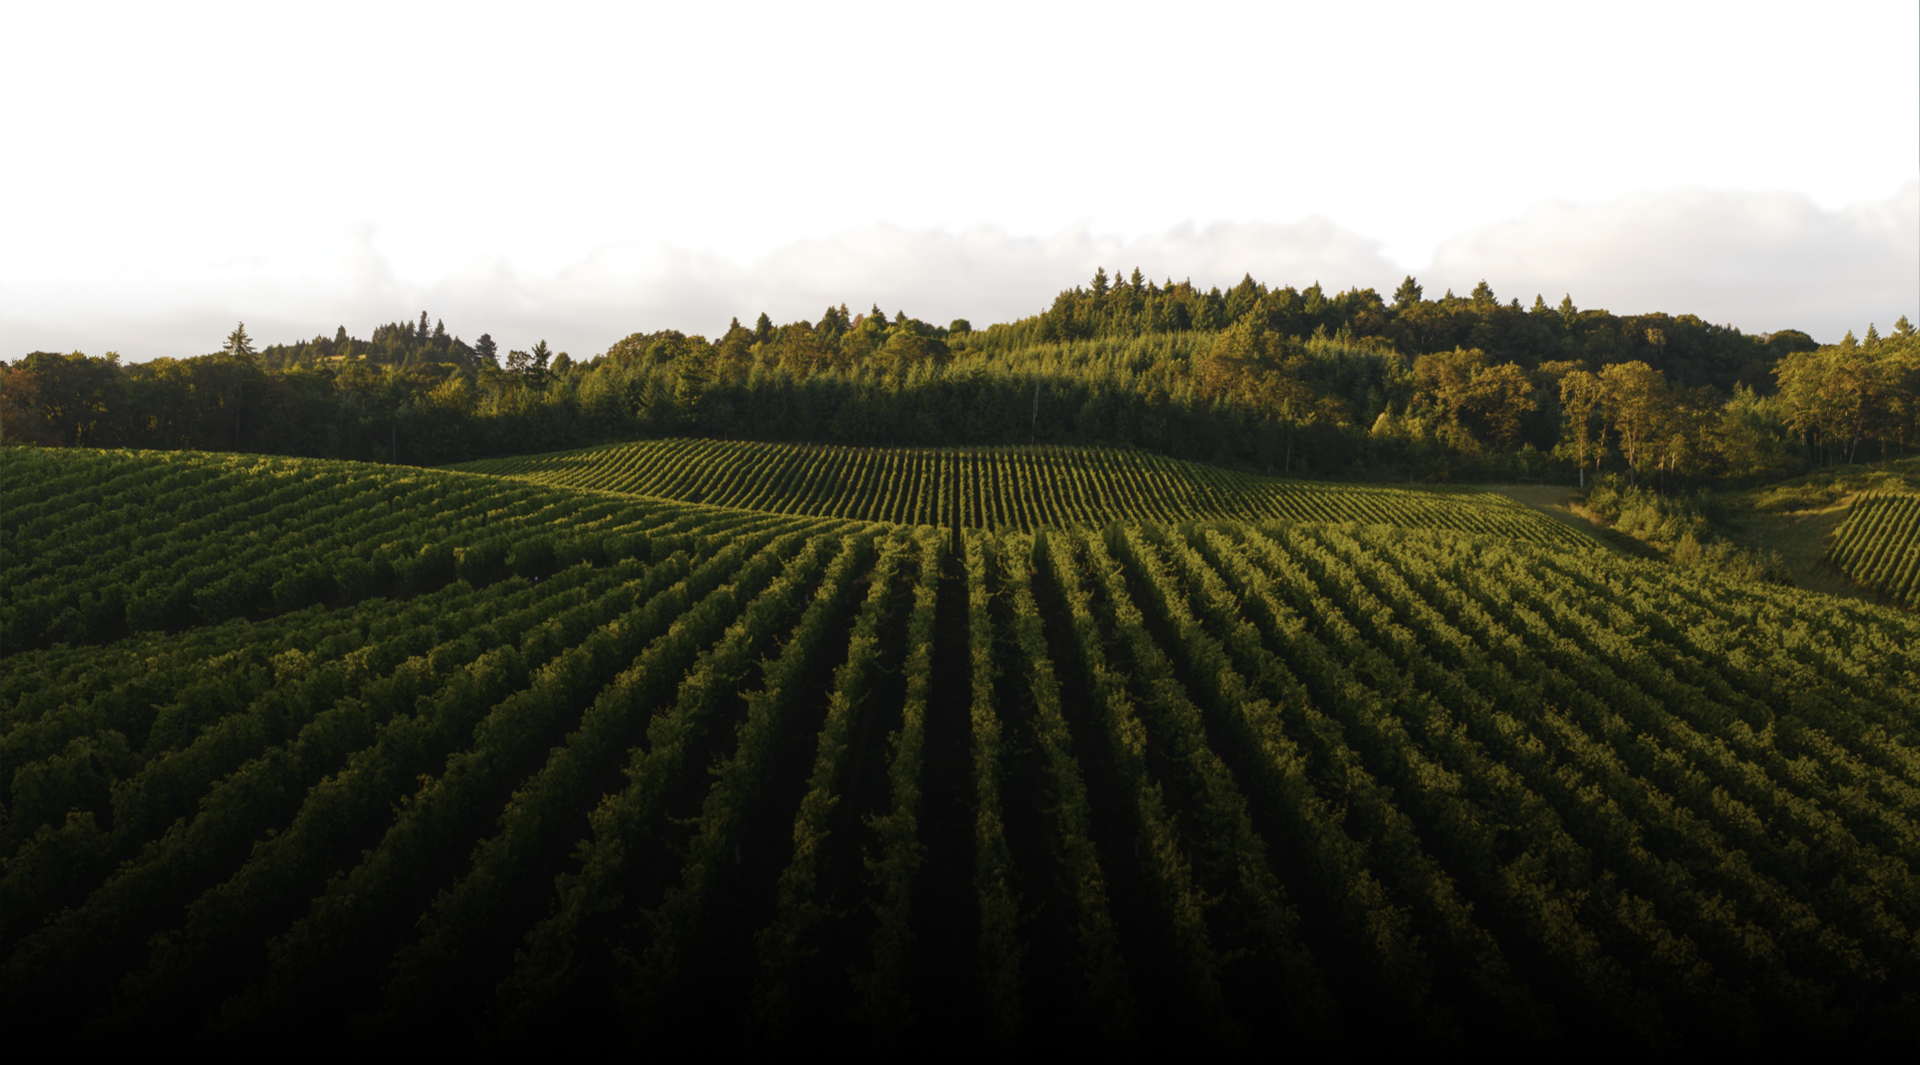 Image of a vineyard with a lush forest in the background